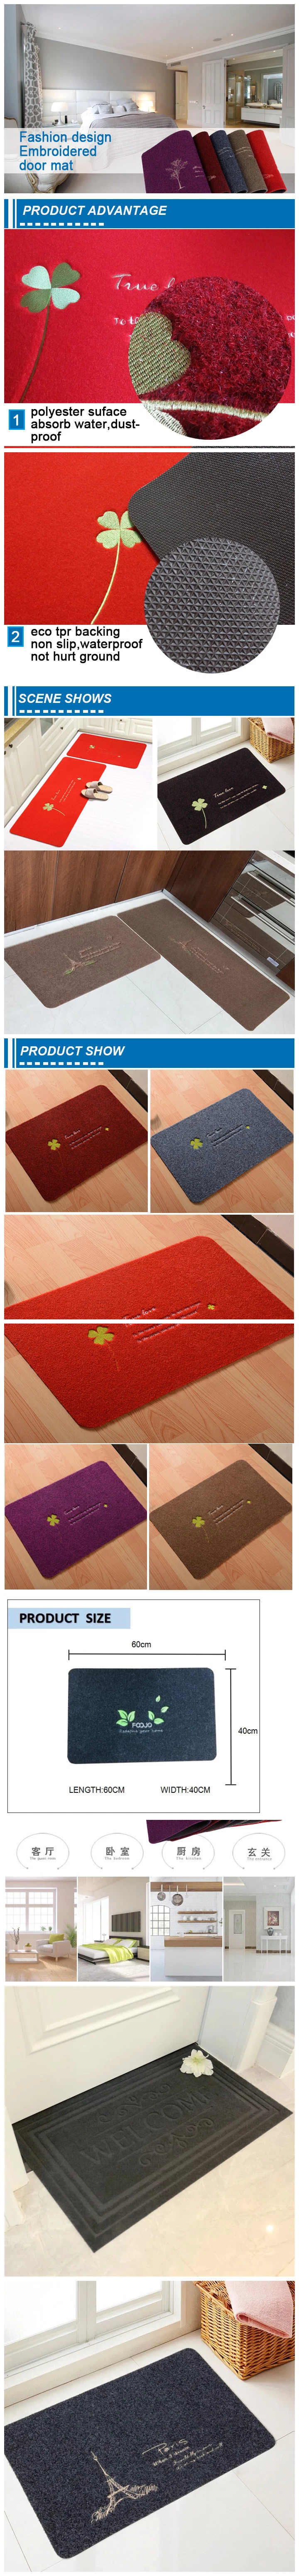 Effective Absorb Water and Mud Away Embroidered TPR Backed Entrance Door Mat Bothroom Mat Living Room Mat Kitchen Floor Mat